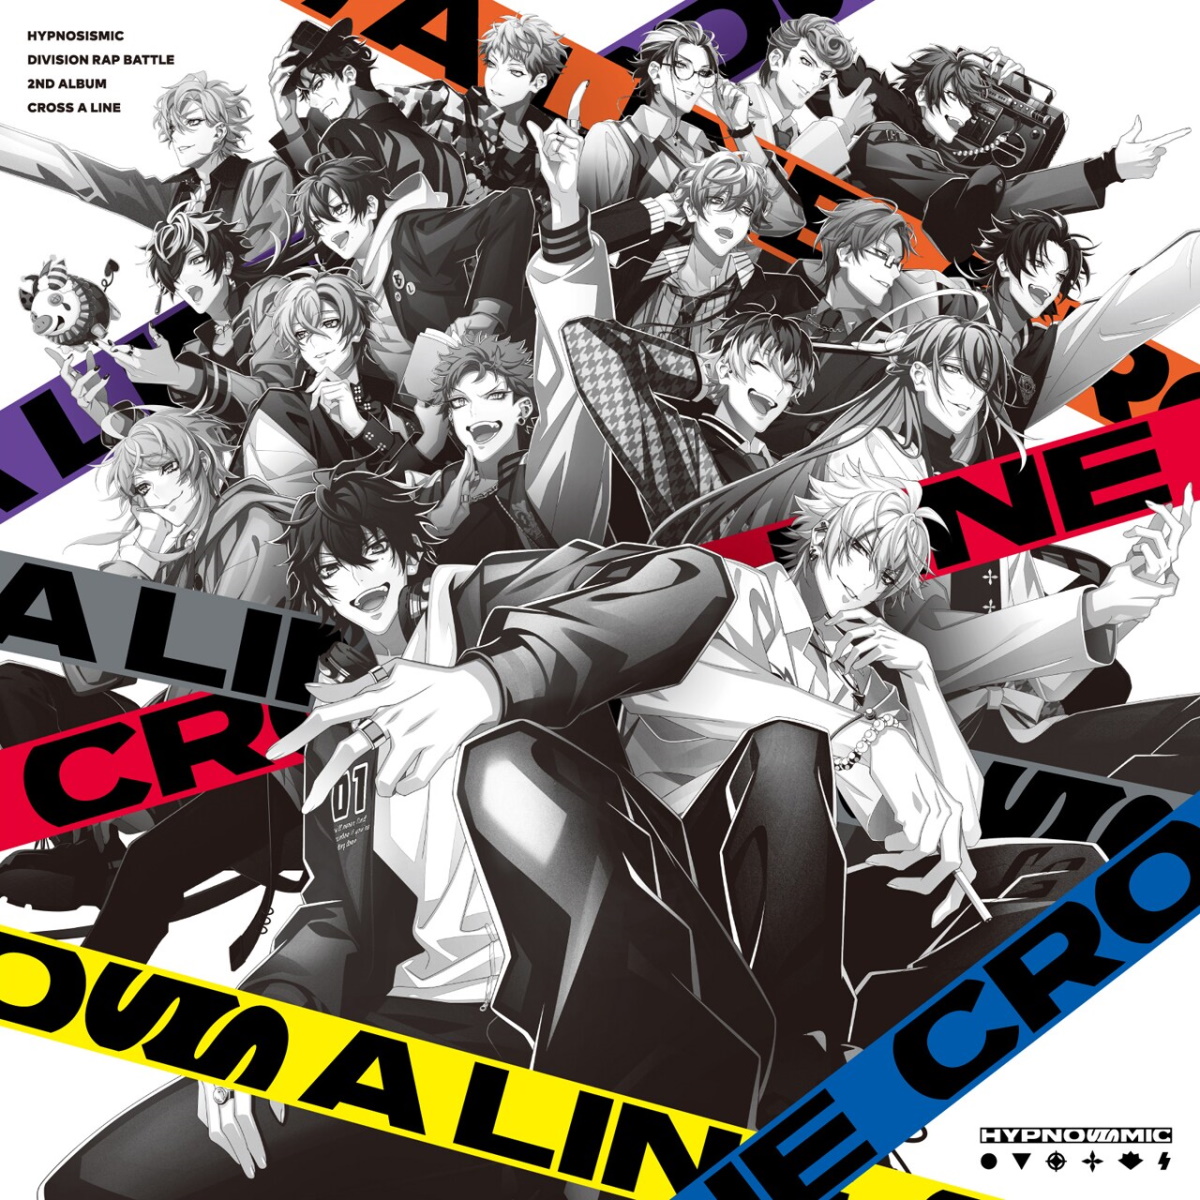 Cover art for『Division All Stars - CROSS A LINE』from the release『CROSS A LINE